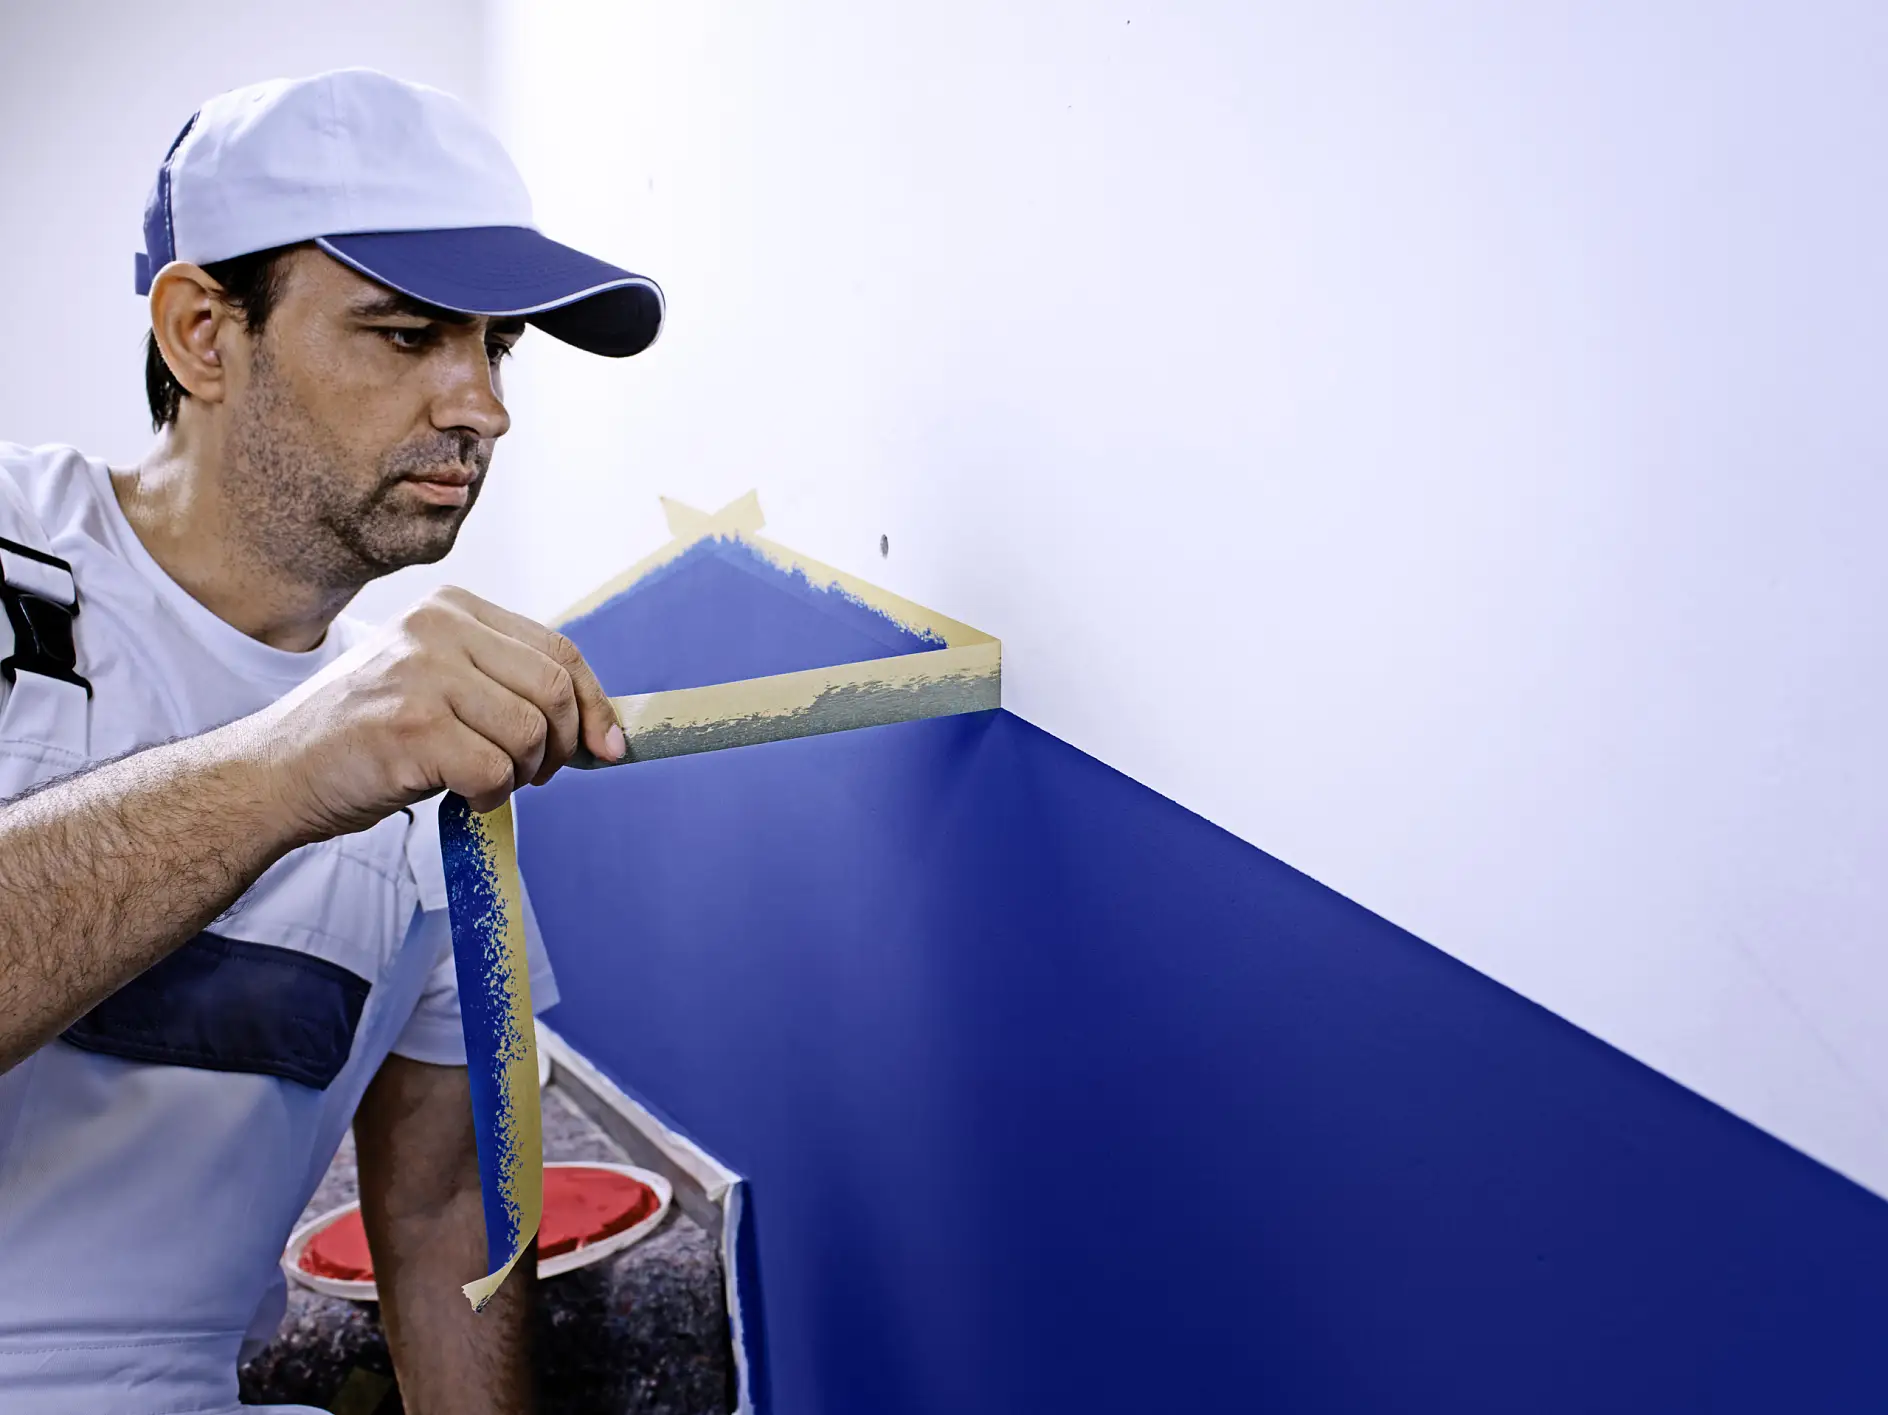 Professional masking and surface protection for sharp paint edges